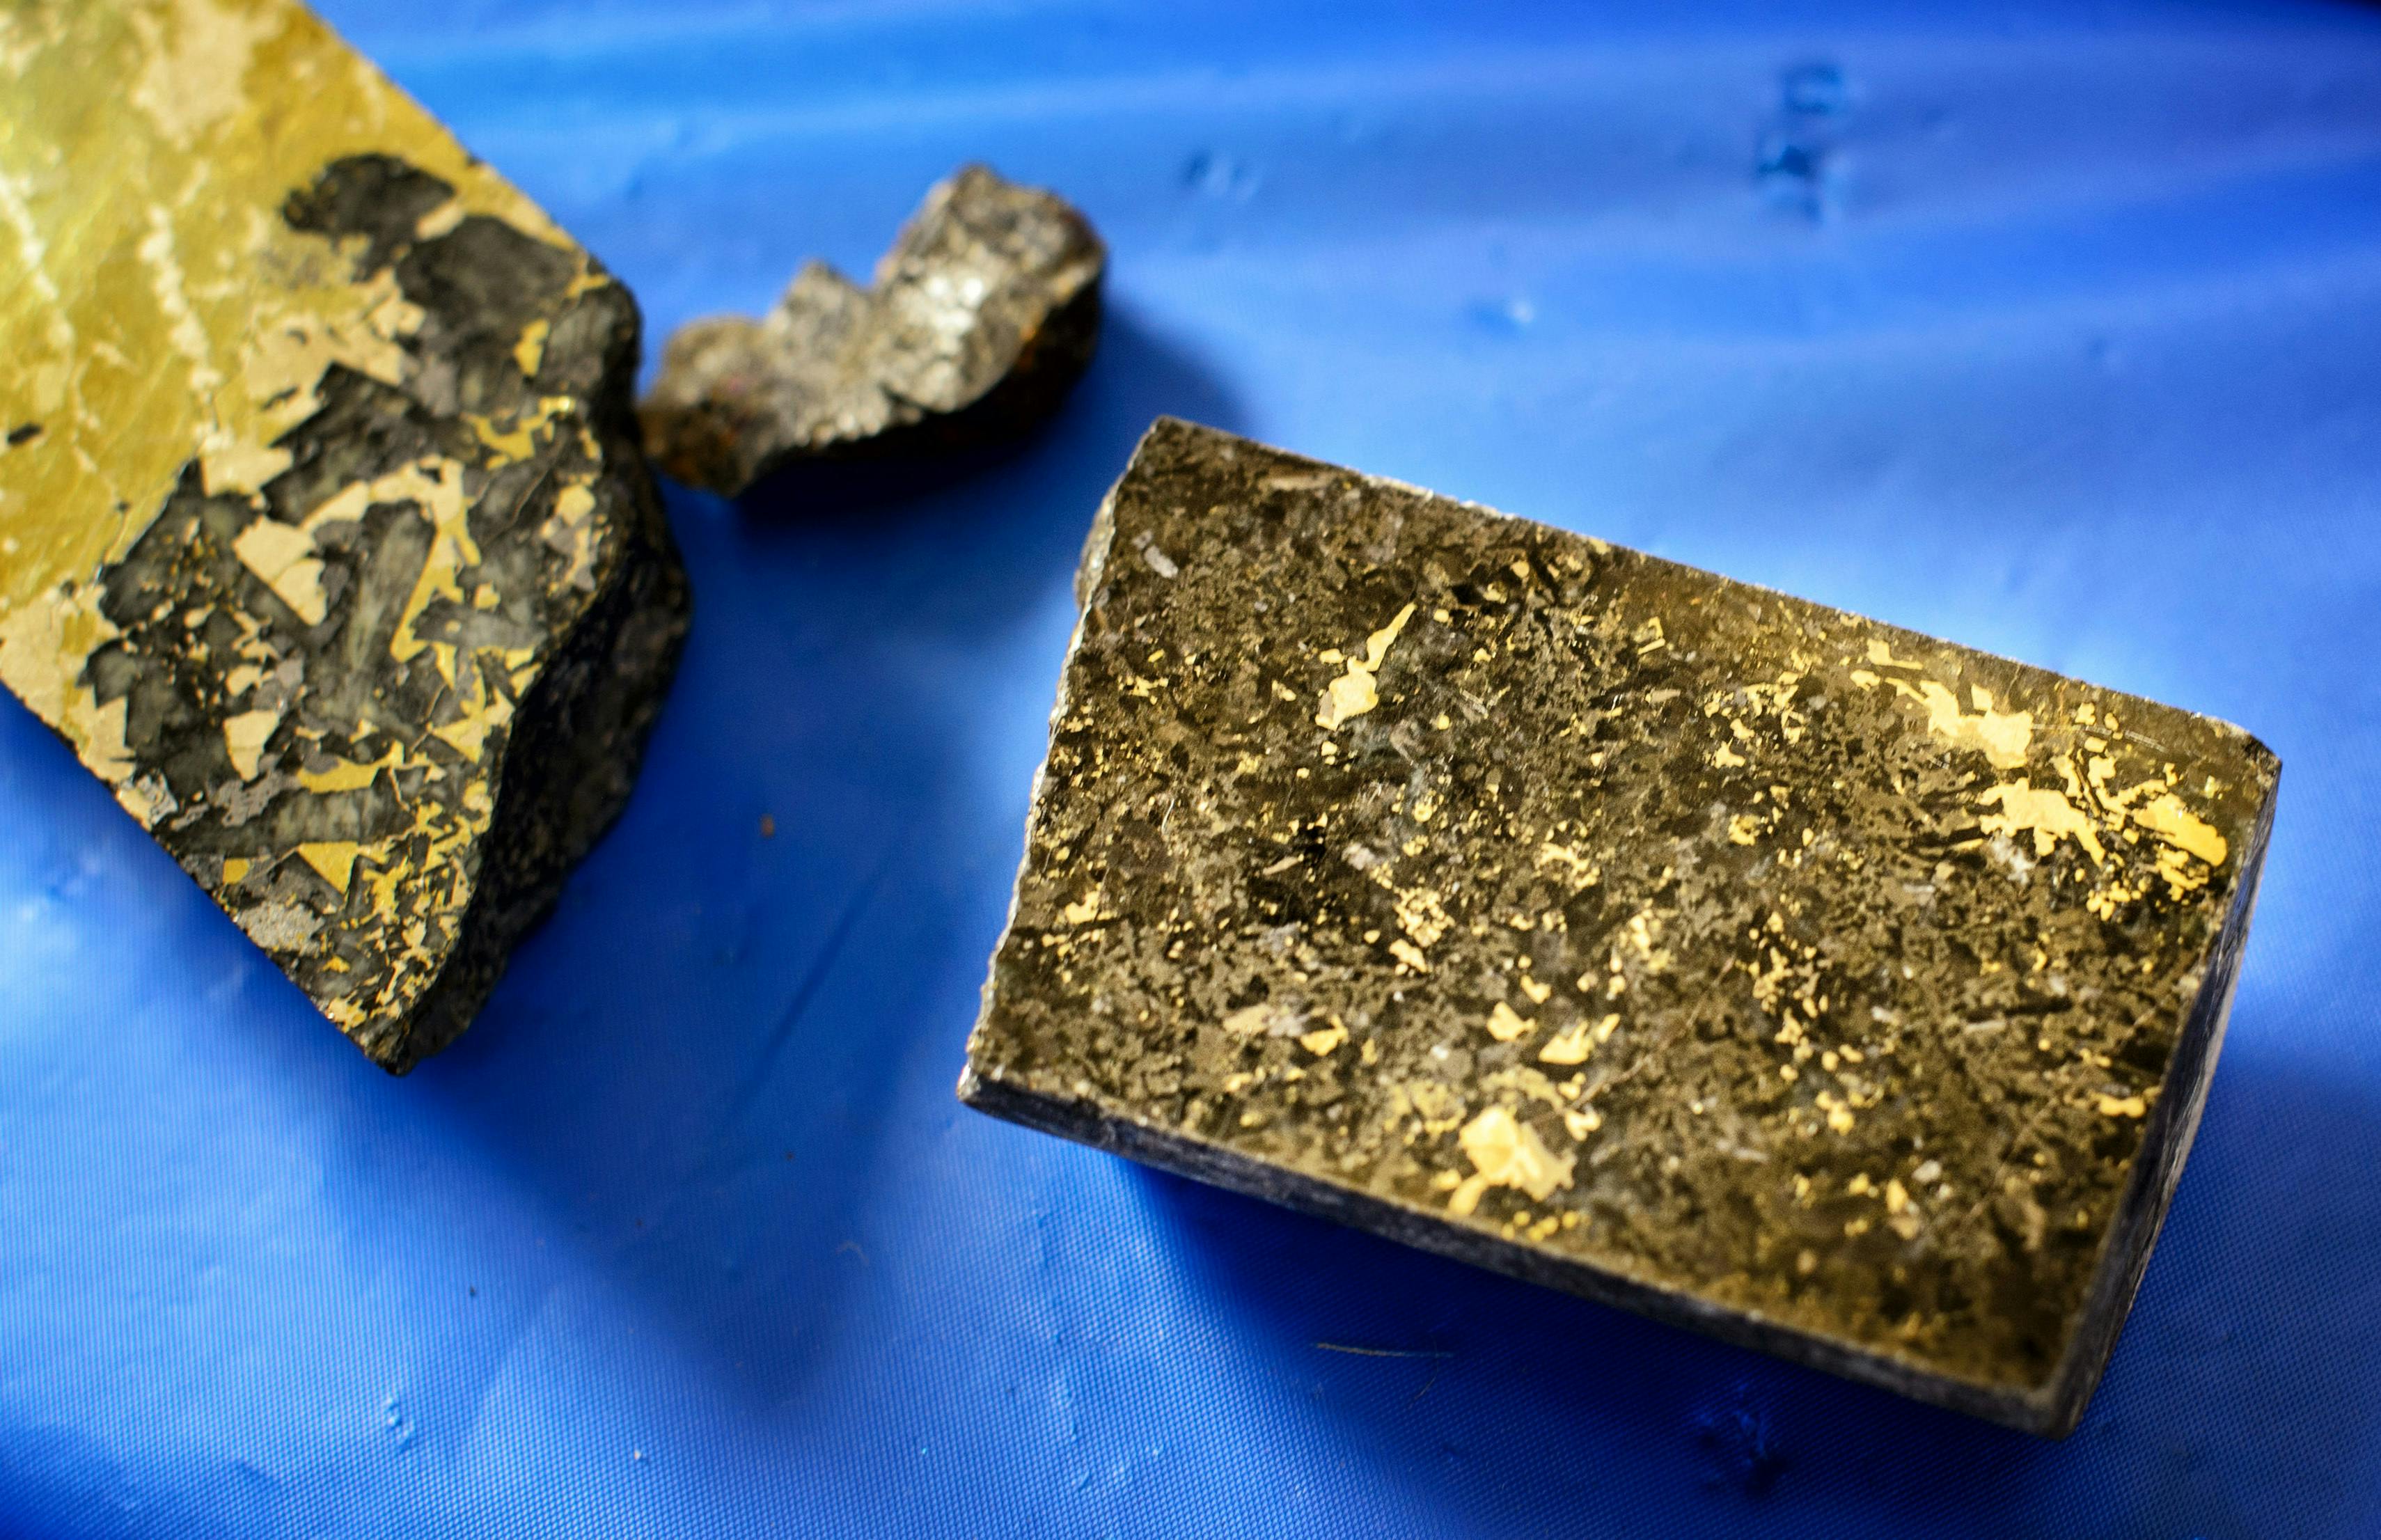 Flecks of ore containing copper, nickel, cobalt, palladium, platinum and gold seen in core samples taken from around PolyMet property.